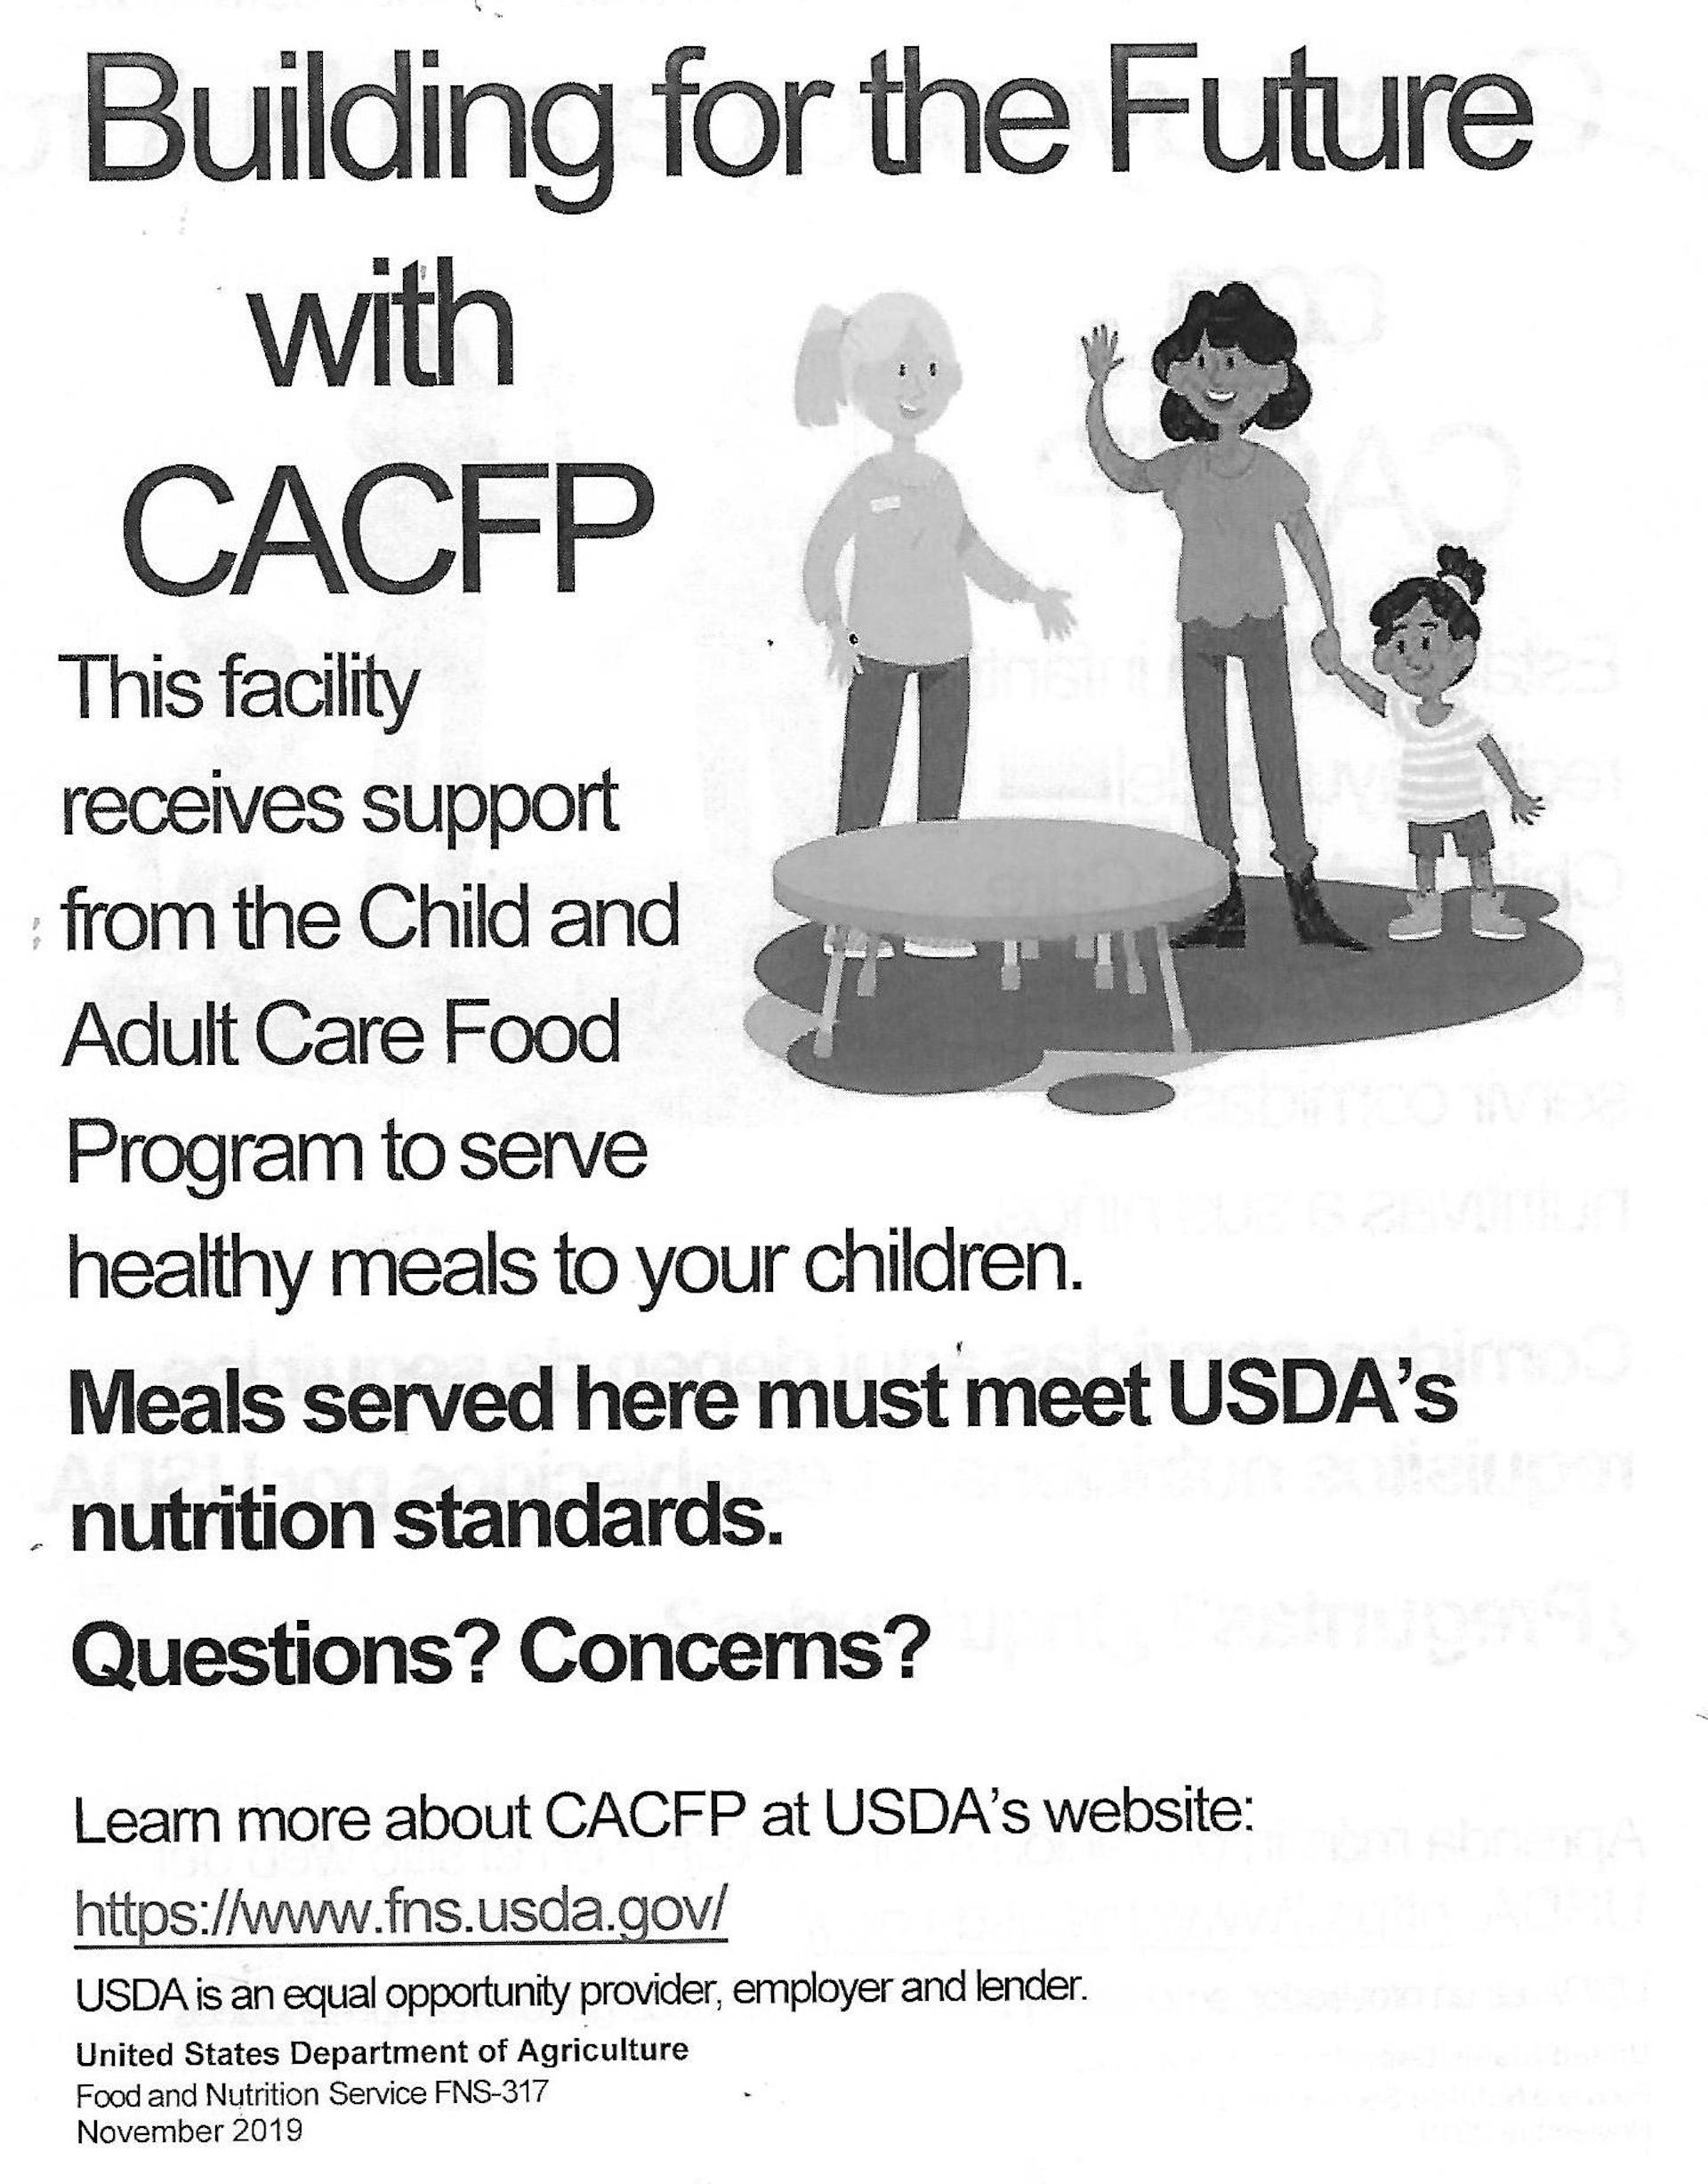  Flyer about Building for the future with CACFP 